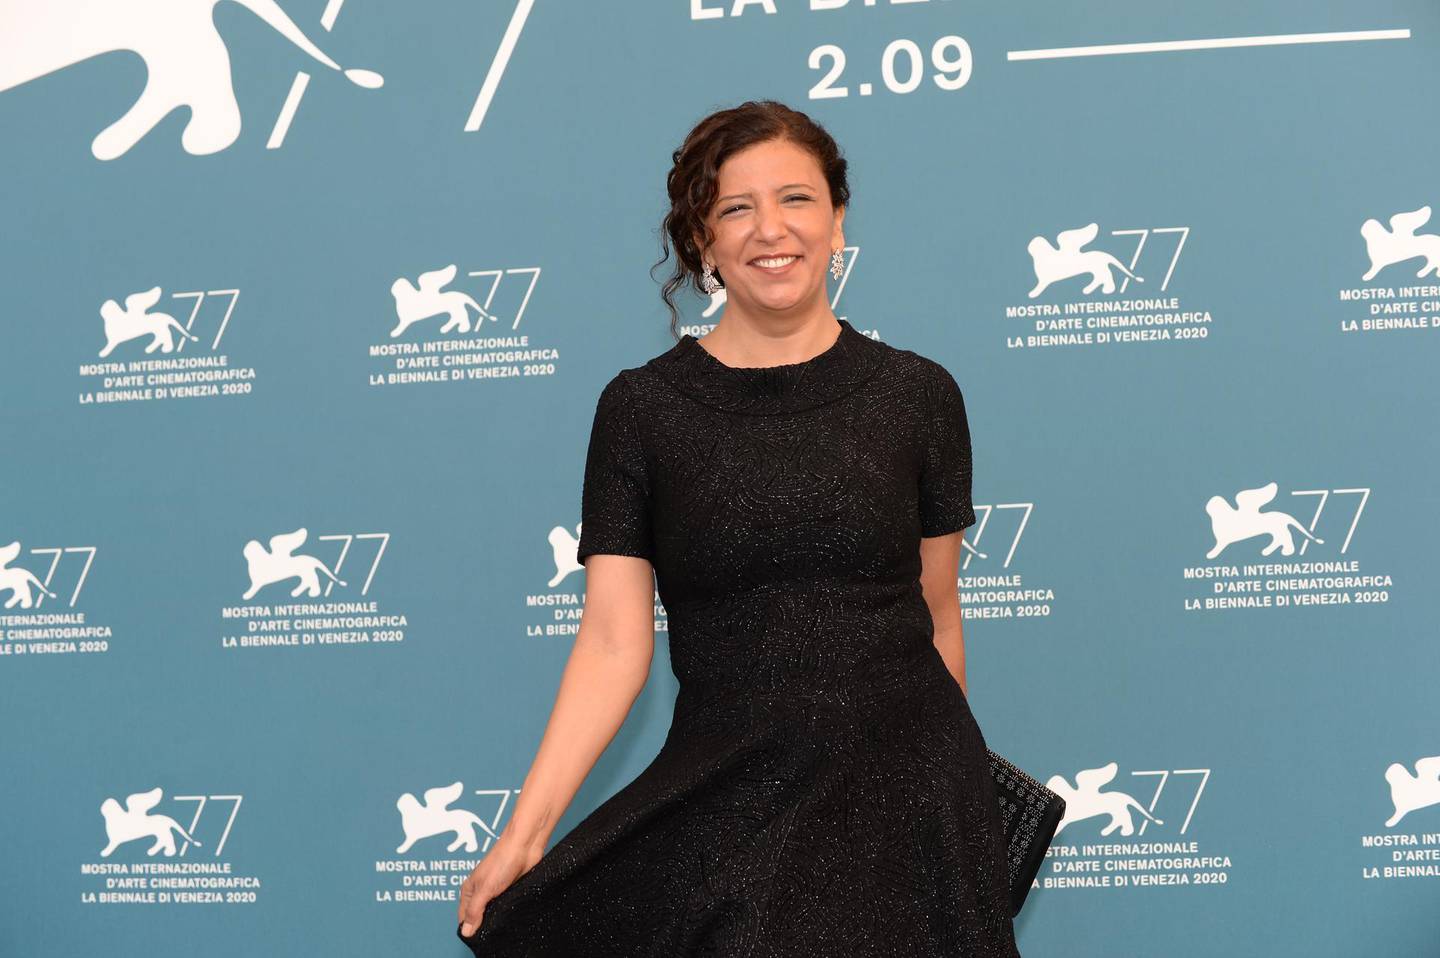 Kaouther Ben Hania is the first Tunisian director to be nominated for an Oscar. La Biennale di Venezia